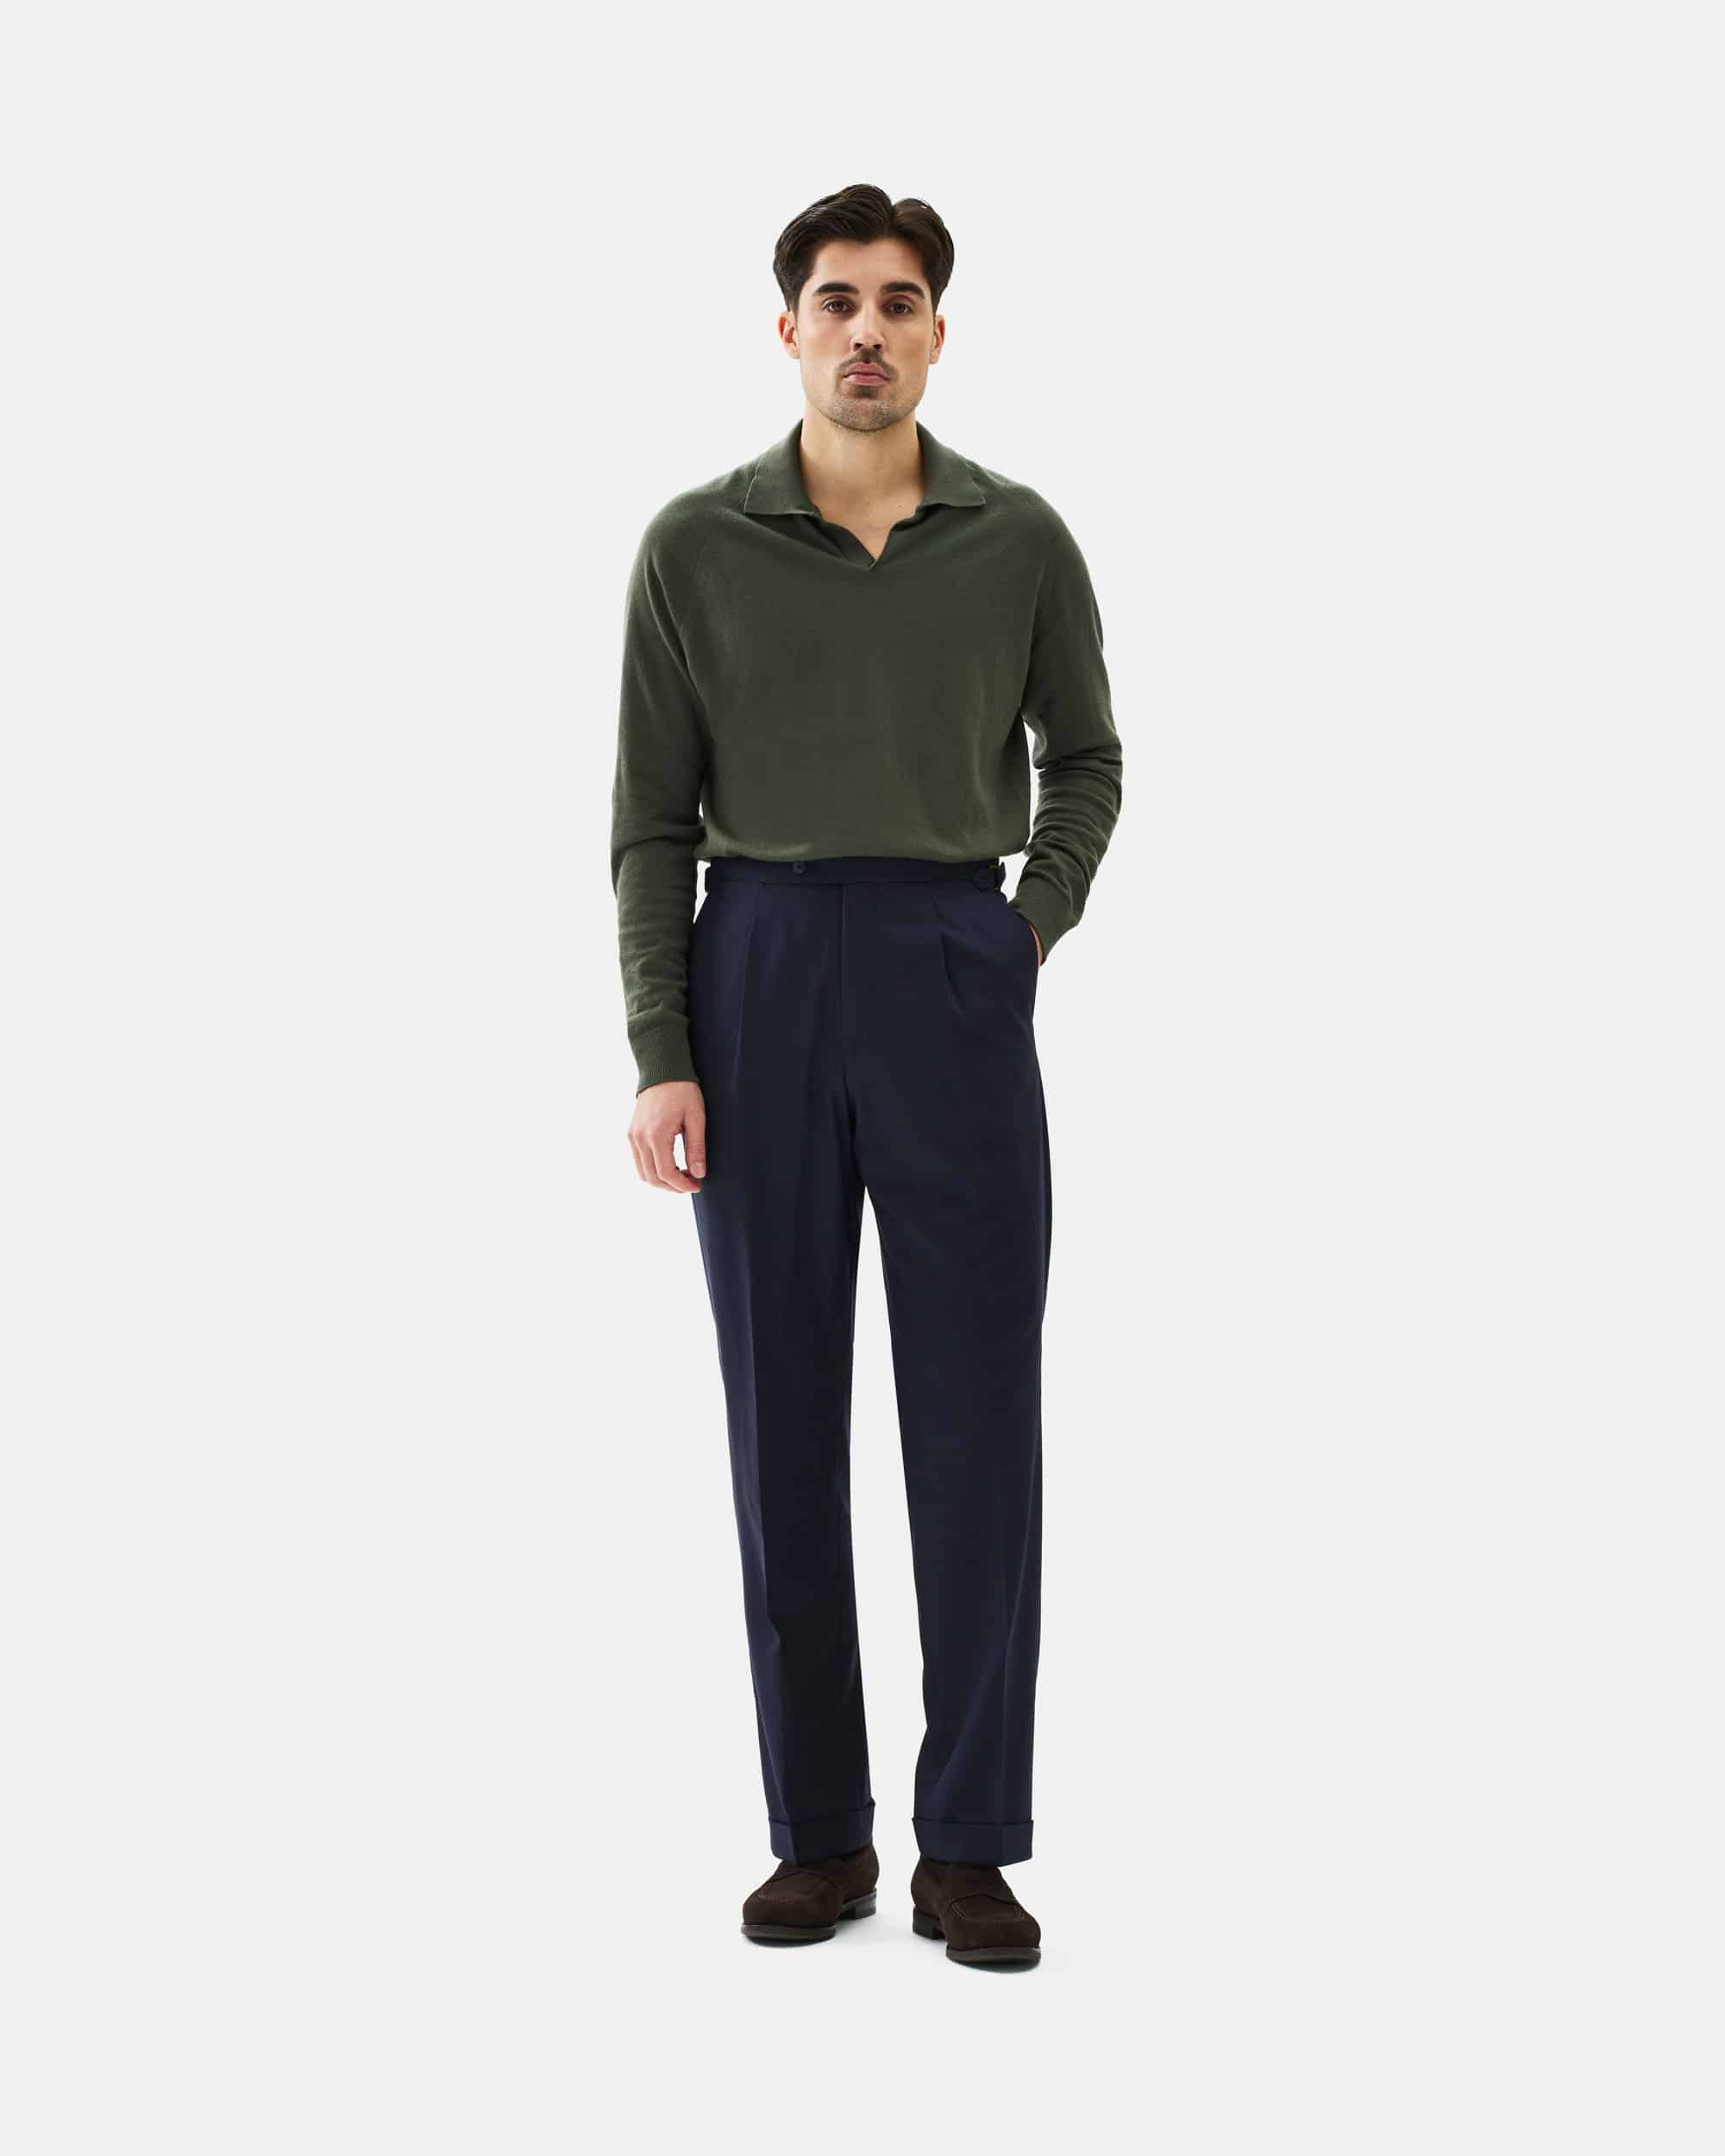 Trousers traveller midnight blue image 3